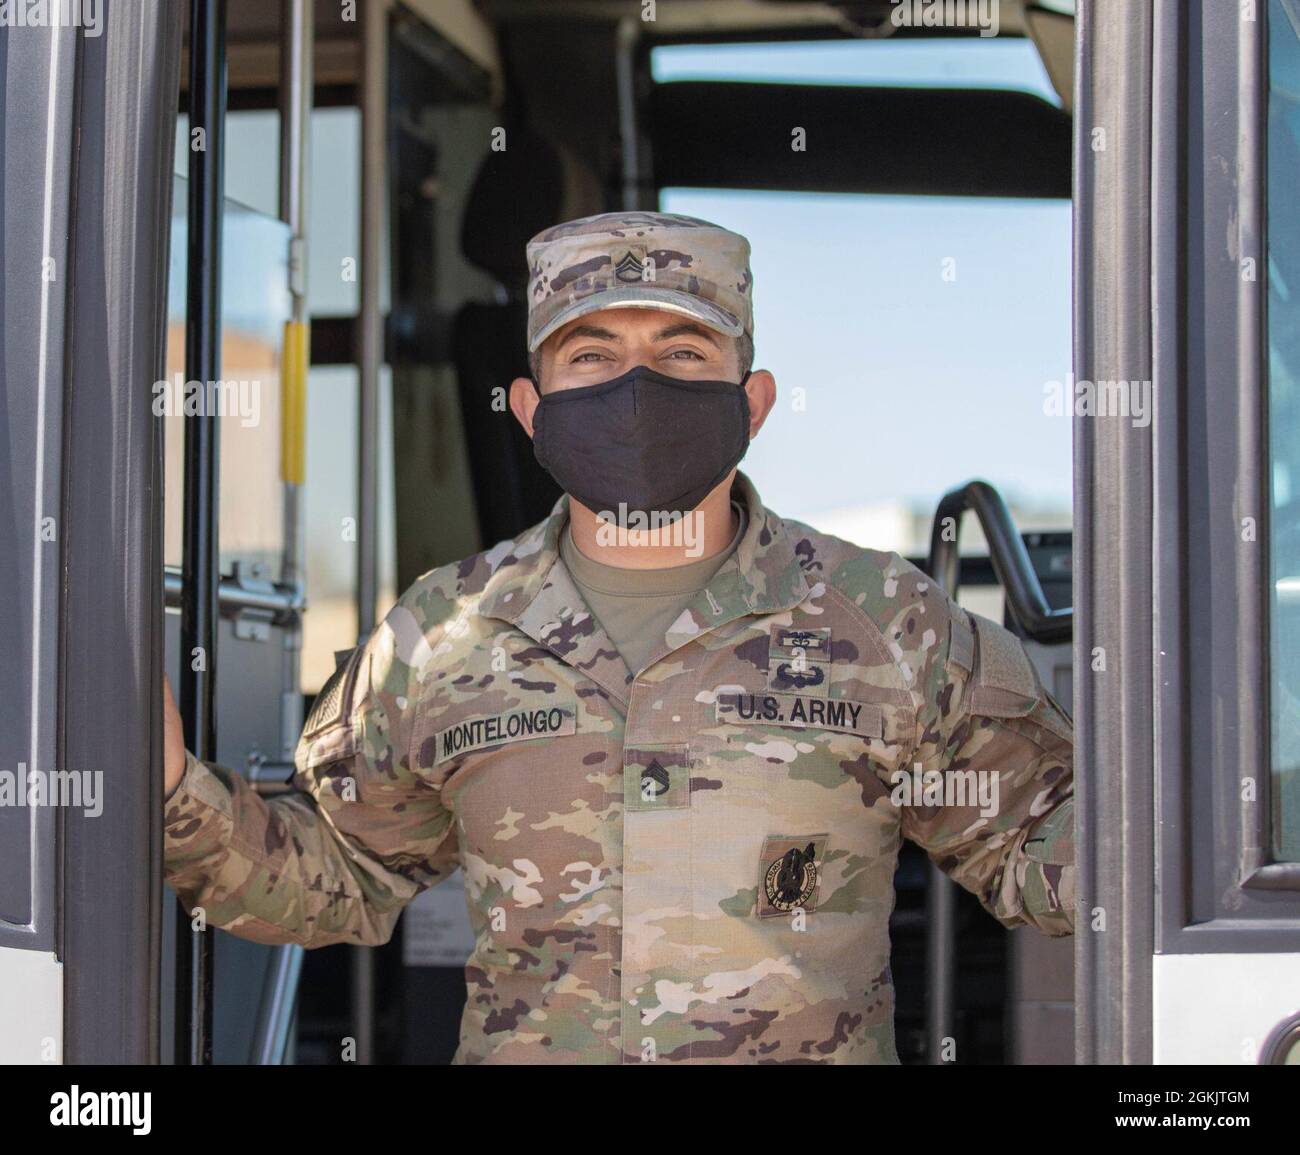 U.S. Army Staff Sgt. Joshua Montelongo, a native of Pueblo, Colorado, and combat medic assigned to 52nd Brigade Engineer Battalion, poses for a photograph in Pueblo, Colorado, May 7, 2021. Montelongo was born and raised in Pueblo and is currently deployed at the Community Vaccination Center at the Colorado State Fairgrounds in Pueblo as part of the federal vaccination mission. U.S. Northern Command, through U.S. Army North, remains committed to providing continued, flexible Department of Defense support to the Federal Emergency Management Agency as part of the whole-of-government response to C Stock Photo